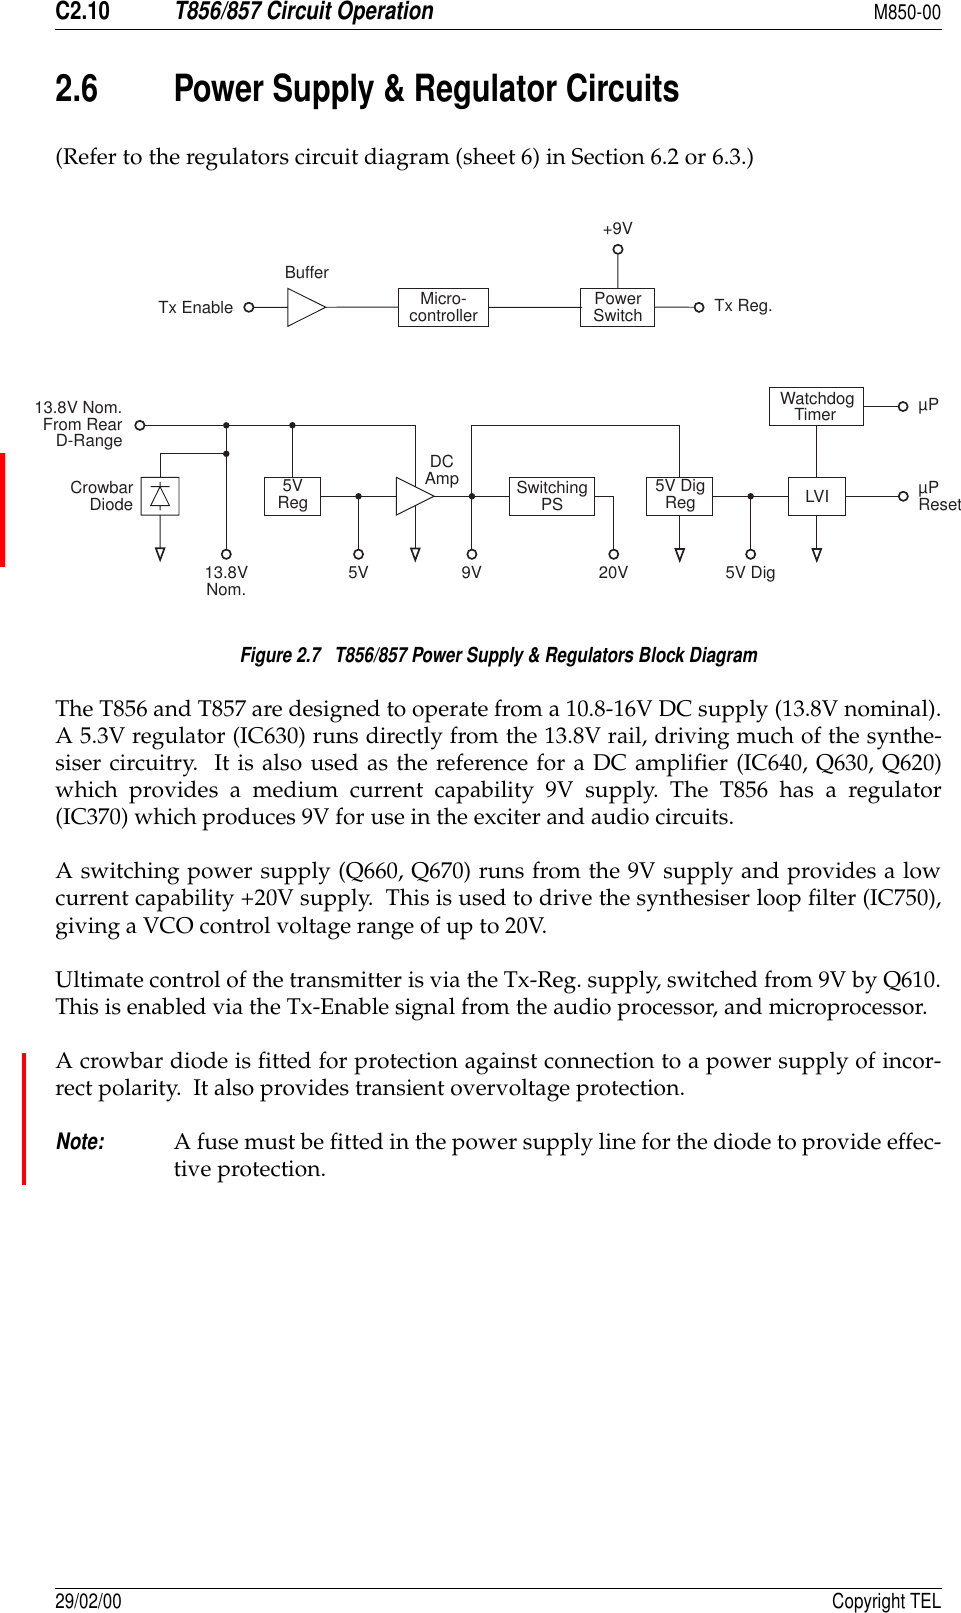 C2.10T856/857 Circuit OperationM850-0029/02/00 Copyright TEL2.6 Power Supply &amp; Regulator Circuits (Refer to the regulators circuit diagram (sheet 6) in Section 6.2 or 6.3.)Figure 2.7   T856/857 Power Supply &amp; Regulators Block DiagramThe T856 and T857 are designed to operate from a 10.8-16V DC supply (13.8V nominal).A 5.3V regulator (IC630) runs directly from the 13.8V rail, driving much of the synthe-siser circuitry.  It is also used as the reference for a DC amplifier (IC640, Q630, Q620)which provides a medium current capability 9V supply. The T856 has a regulator(IC370) which produces 9V for use in the exciter and audio circuits.A switching power supply (Q660, Q670) runs from the 9V supply and provides a lowcurrent capability +20V supply.  This is used to drive the synthesiser loop filter (IC750),giving a VCO control voltage range of up to 20V.Ultimate control of the transmitter is via the Tx-Reg. supply, switched from 9V by Q610.This is enabled via the Tx-Enable signal from the audio processor, and microprocessor.  A crowbar diode is fitted for protection against connection to a power supply of incor-rect polarity.  It also provides transient overvoltage protection.Note:A fuse must be fitted in the power supply line for the diode to provide effec-tive protection.CrowbarDiode LVI5VRegDCAmp SwitchingPS 5V DigRegPowerSwitch13.8VNom. 5V 5V Dig9V 20V13.8V Nom.From RearD-RangeTx EnableBufferTx Reg.+9VµPWatchdogTimerMicro-controllerµPReset